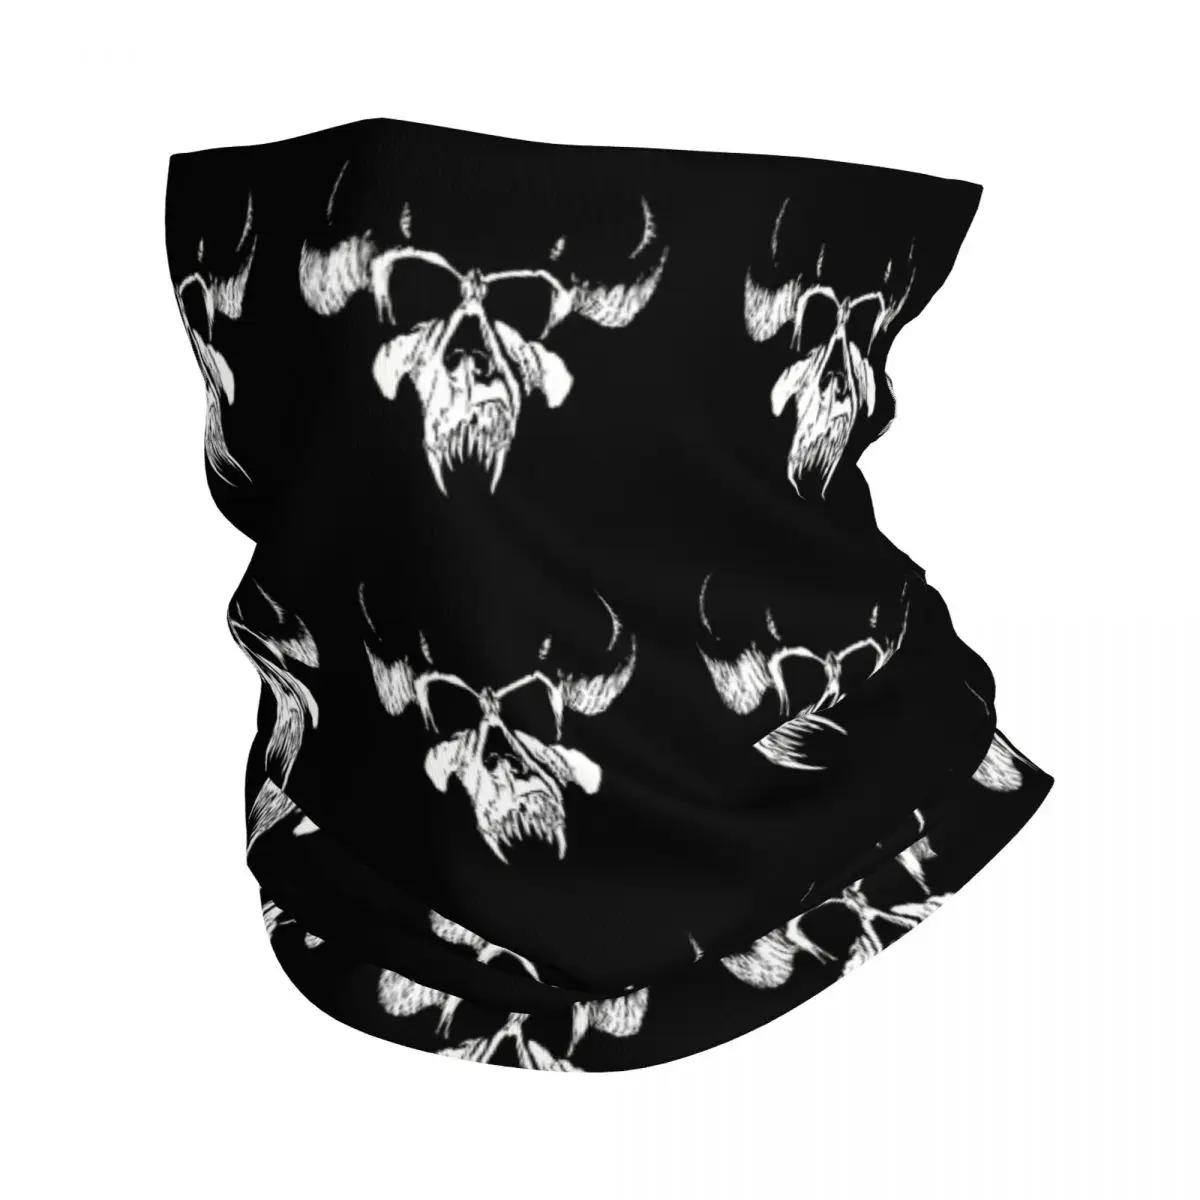 

Danzigs Skull Bandana Neck Cover Printed Punk Metal Band Mask Scarf Warm Headwear Hiking for Men Women Adult Breathable